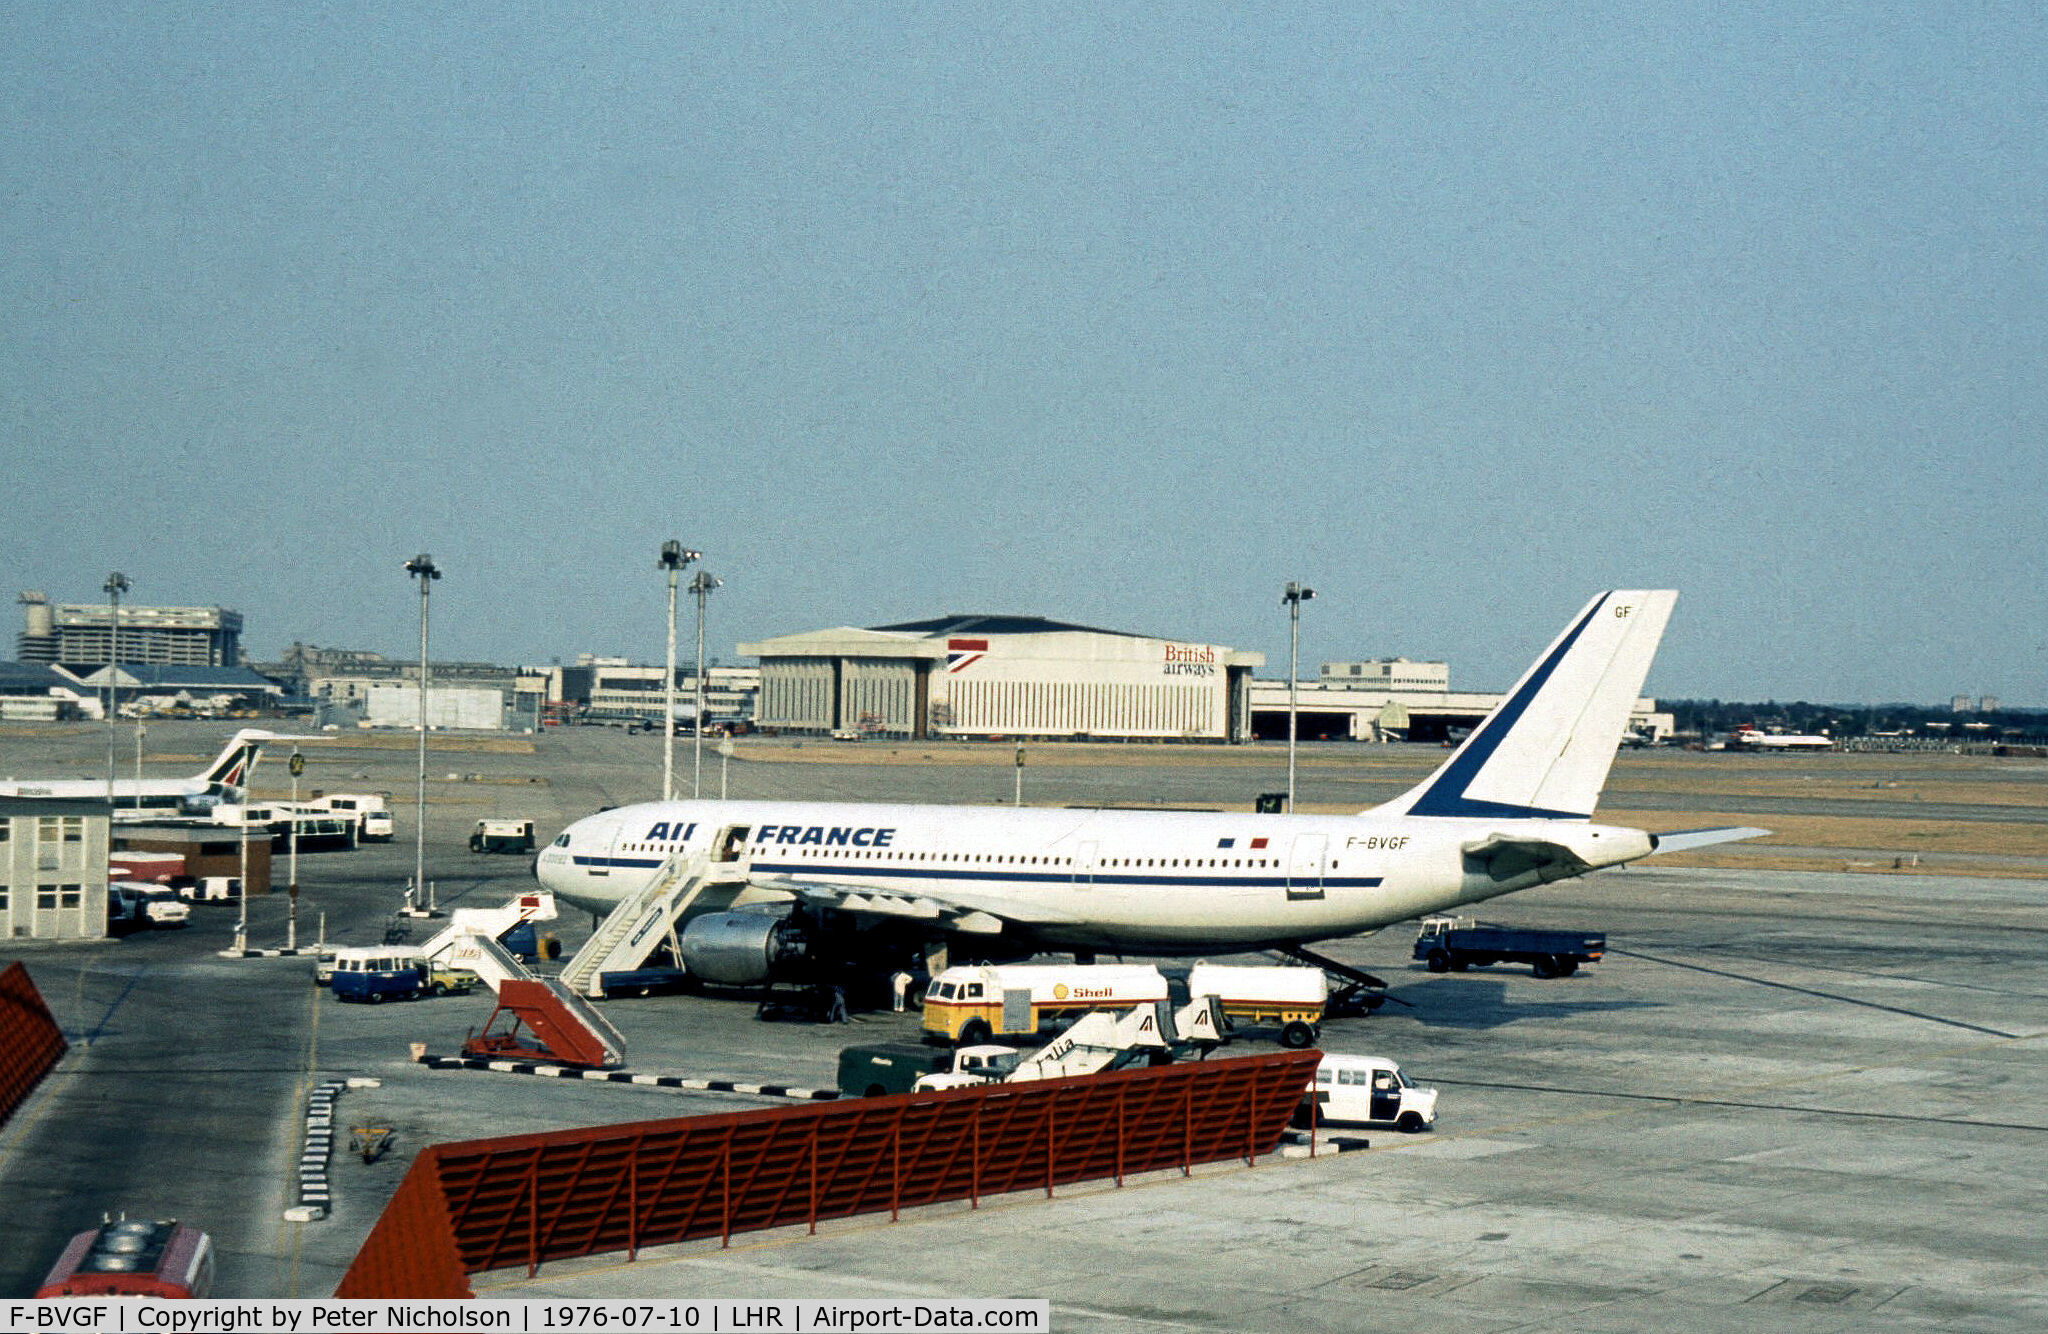 F-BVGF, 1975 Airbus A300B2-1C C/N 13, Airbus A300B2-1C of Air France as seen at Heathrow in the Summer of 1976.